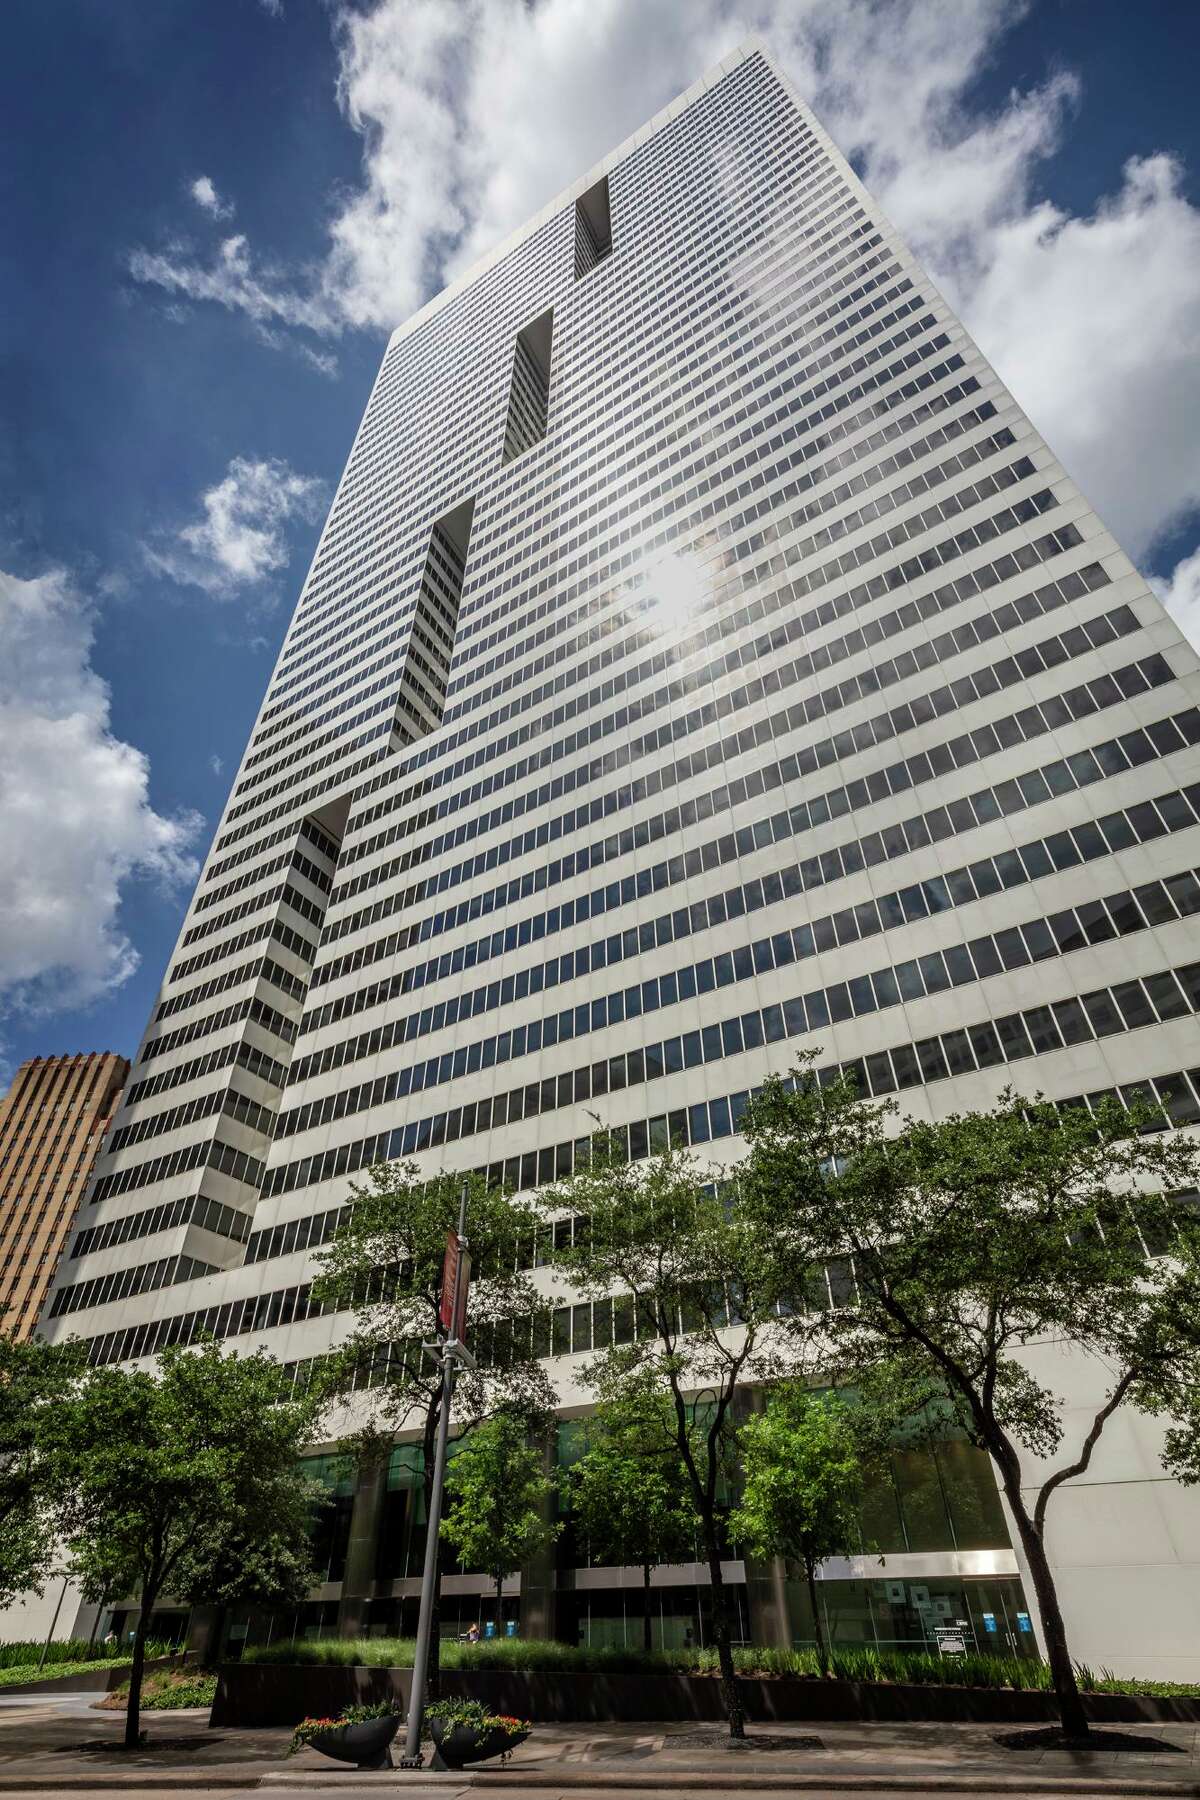 Liskow & Lewis, an energy law firm based in New Orleans, occupies 30,000 square feet at 1001 Fannin.